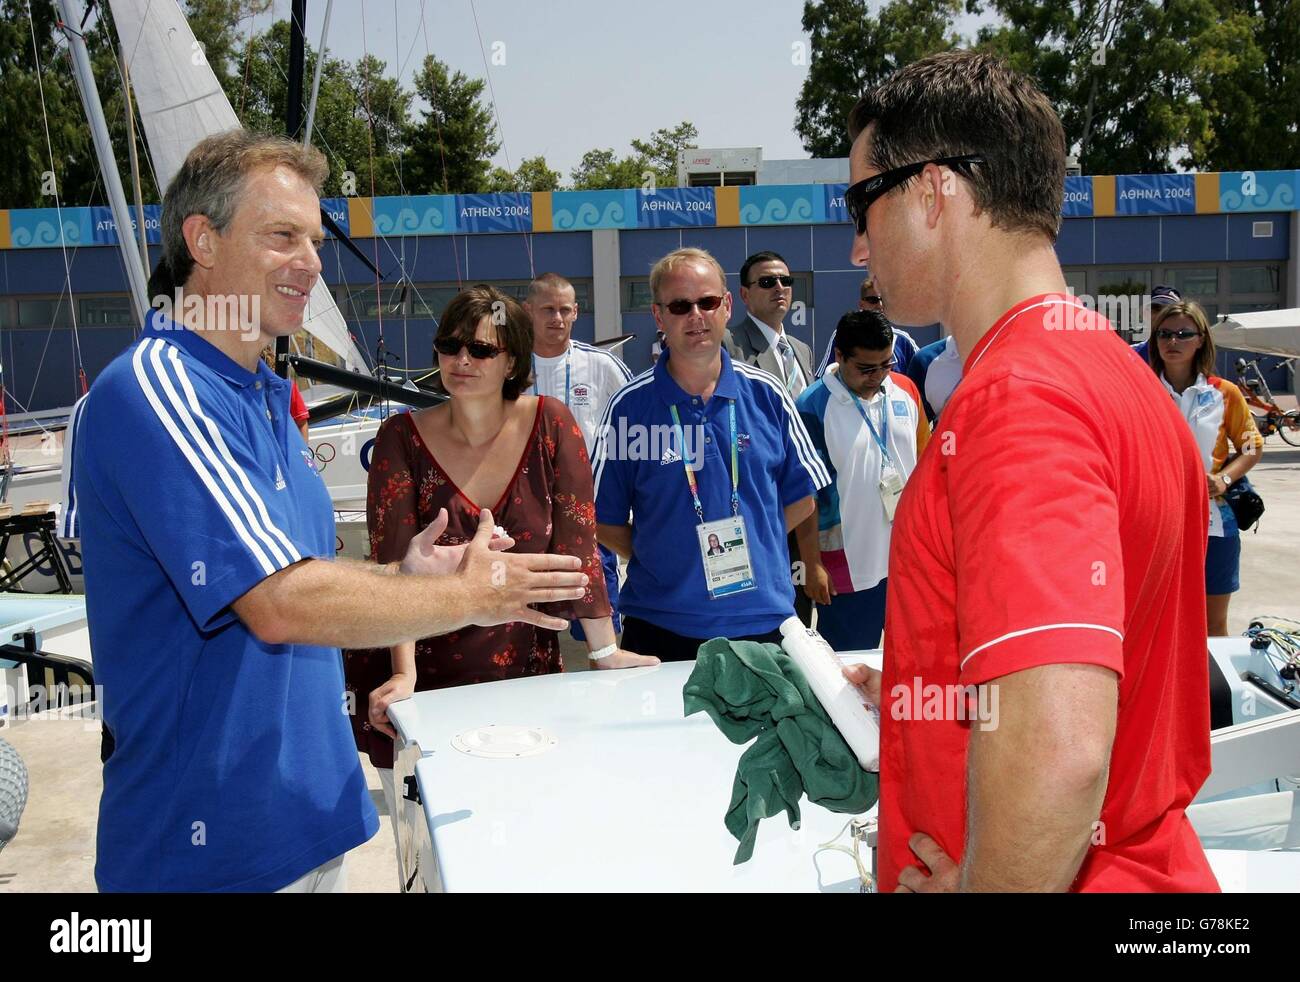 Prime Minister Tony Blair (left) and his wife Cherie (to his right) meet with members of the Great Britain Olympic Sailing team at the Agios Kosmas Olympic Sailing Centre prior to the start of the Athens 2004 Summer Olympic Games in Athens, Greece. Mr Blair, attending the opening ceremony for the Olympics as part of a tour, will be staying on the worlds largest cruise liner the Queen Mary 2. He said it would be 'fantastic' if London won the race to stage the 2012 games. Stock Photo